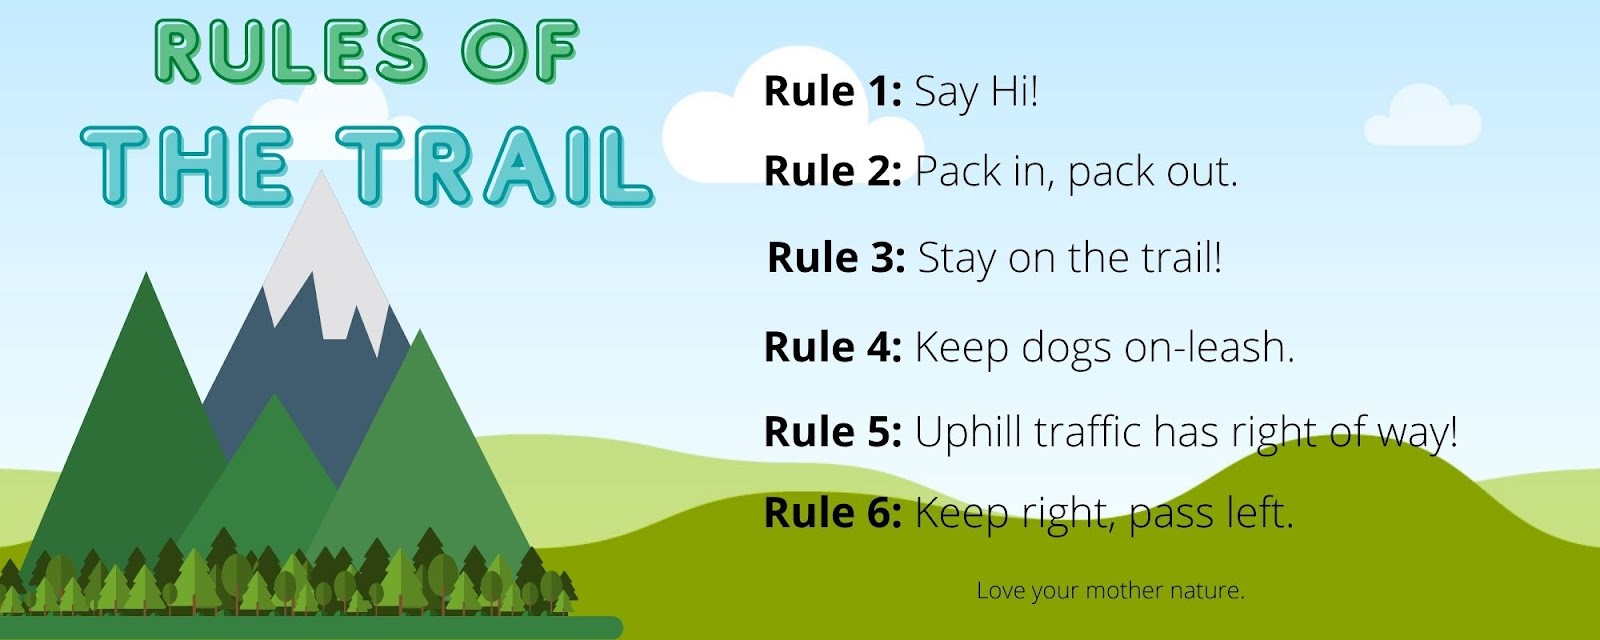 Rules of the Trail from Code of the West Real Estate